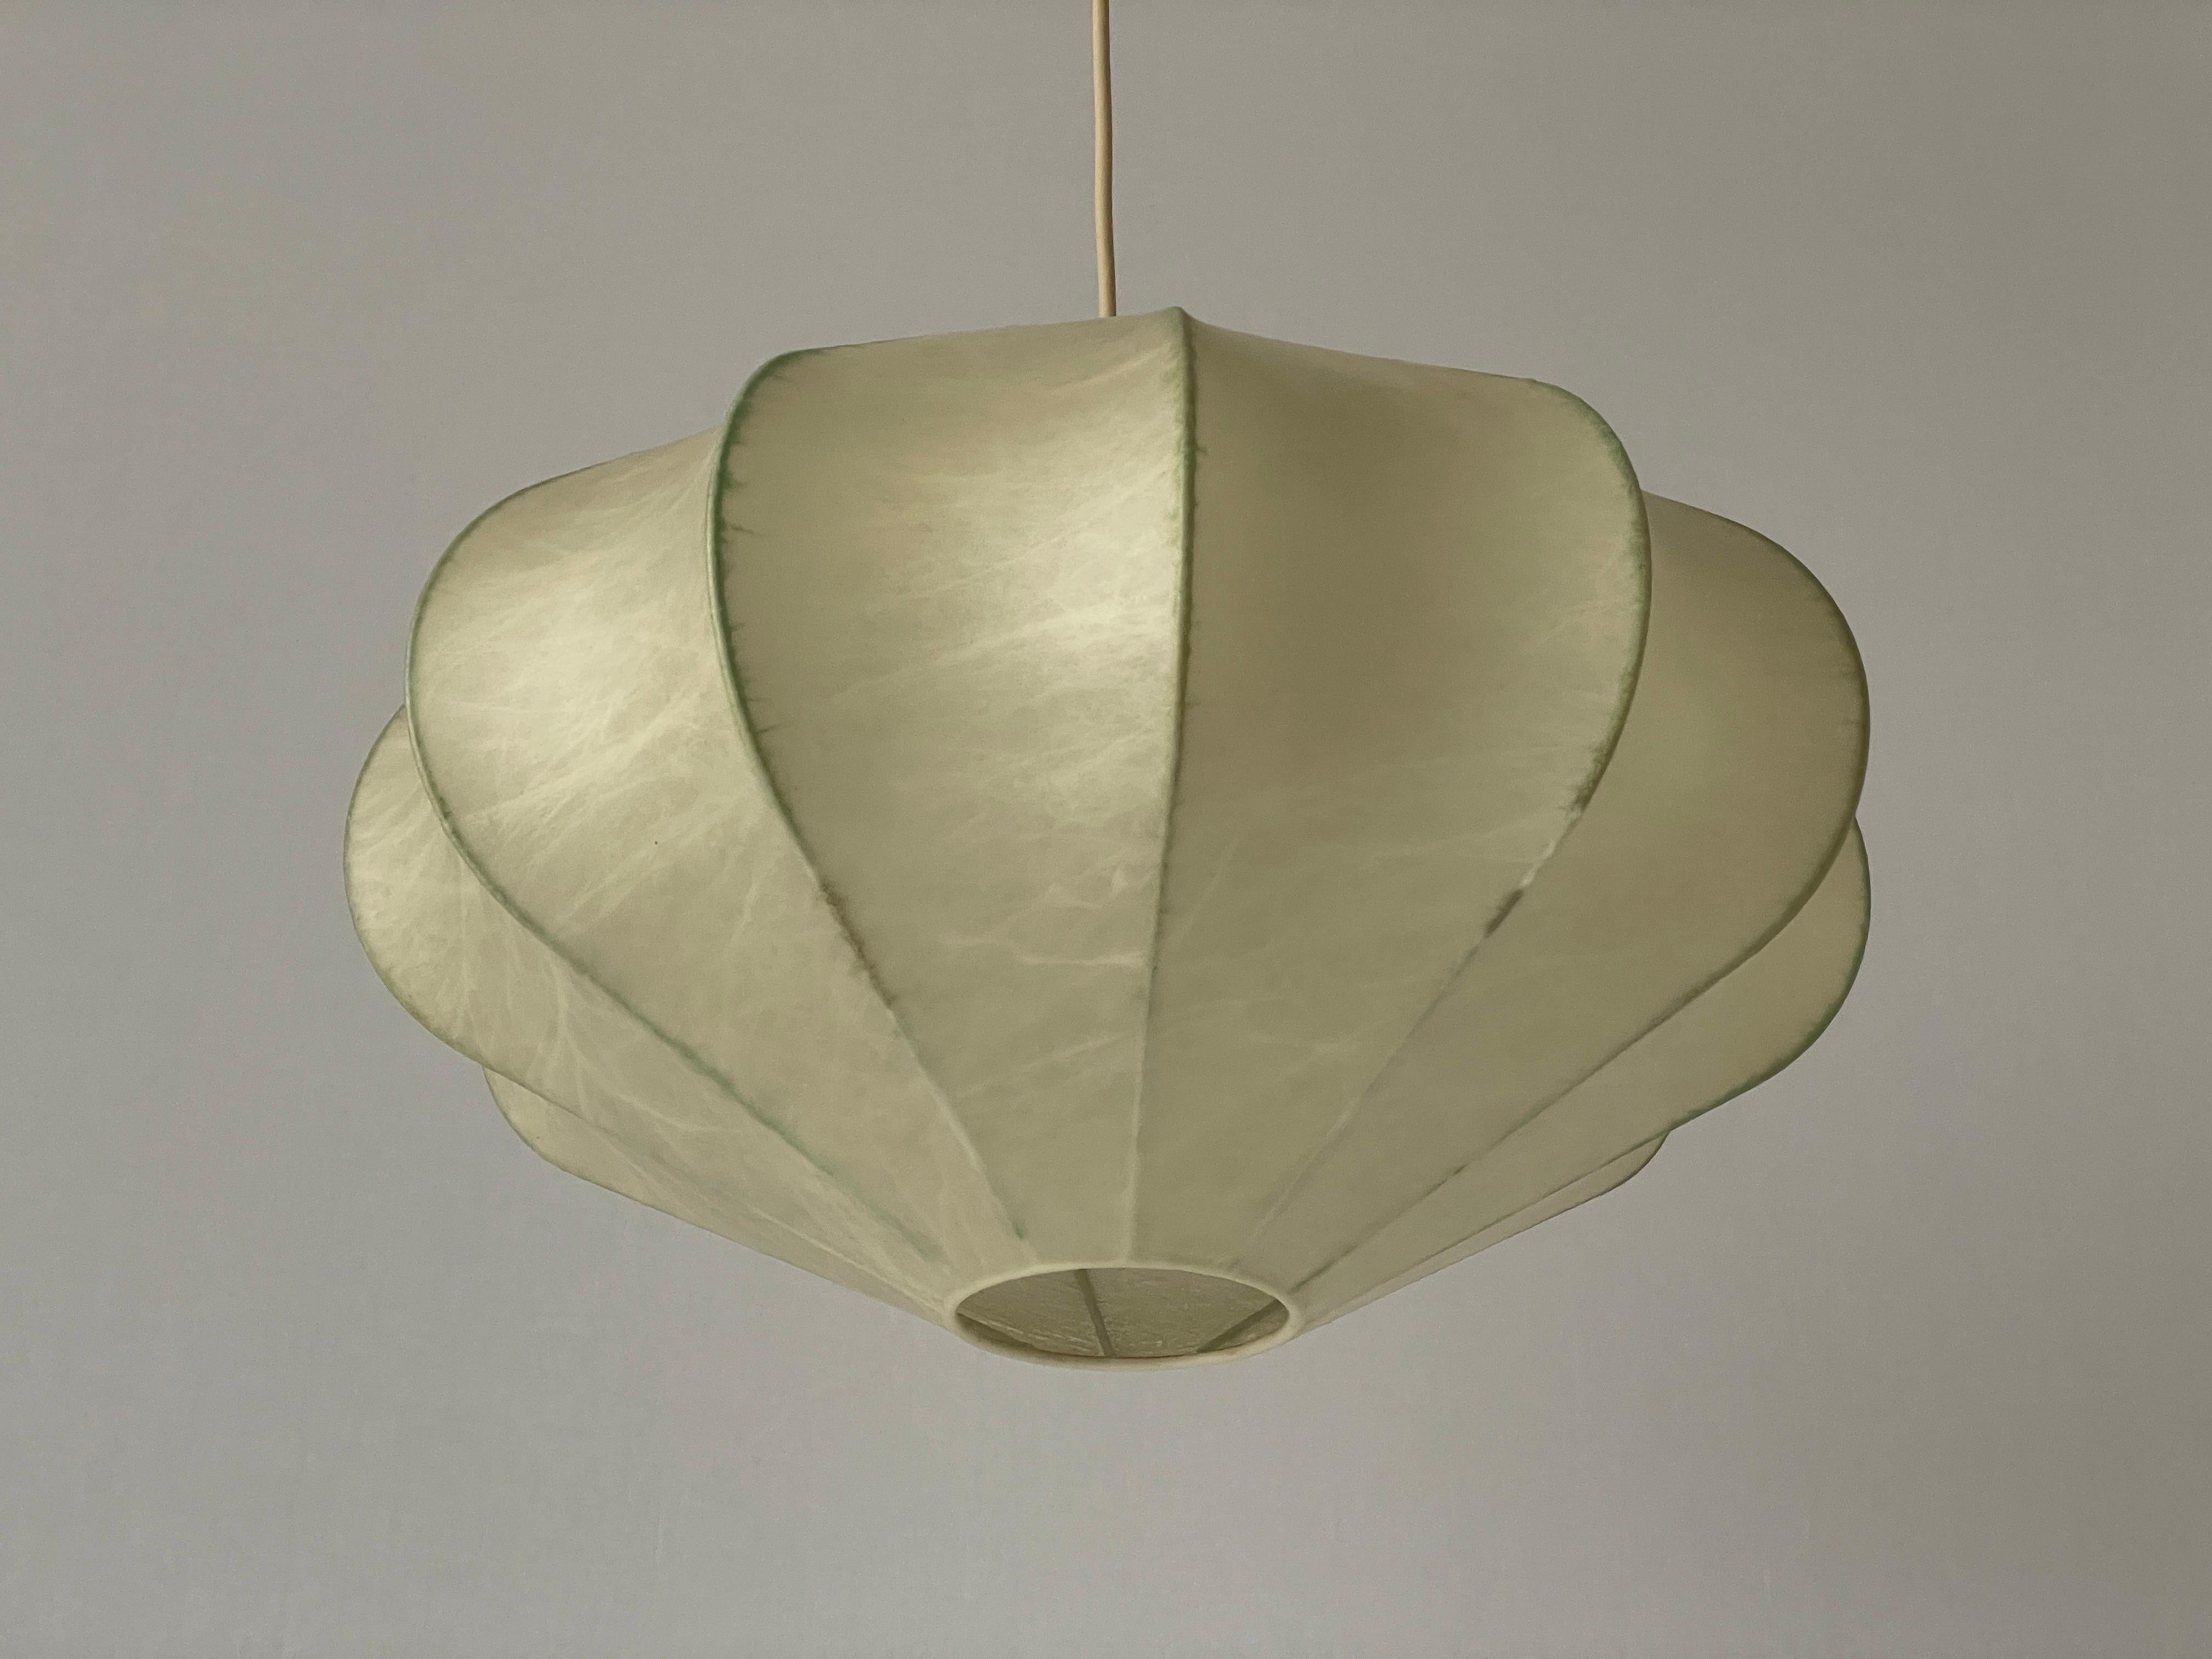 Cocoon pendant lamp by Goldkant, 1960s, Germany


Lampshade is in very good vintage condition.

This lamp works with E27 light bulbs. 
Wired and suitable to use with 220V and 110V for all countries.

Measurements:
Height: 70 cm
Shade diameter and